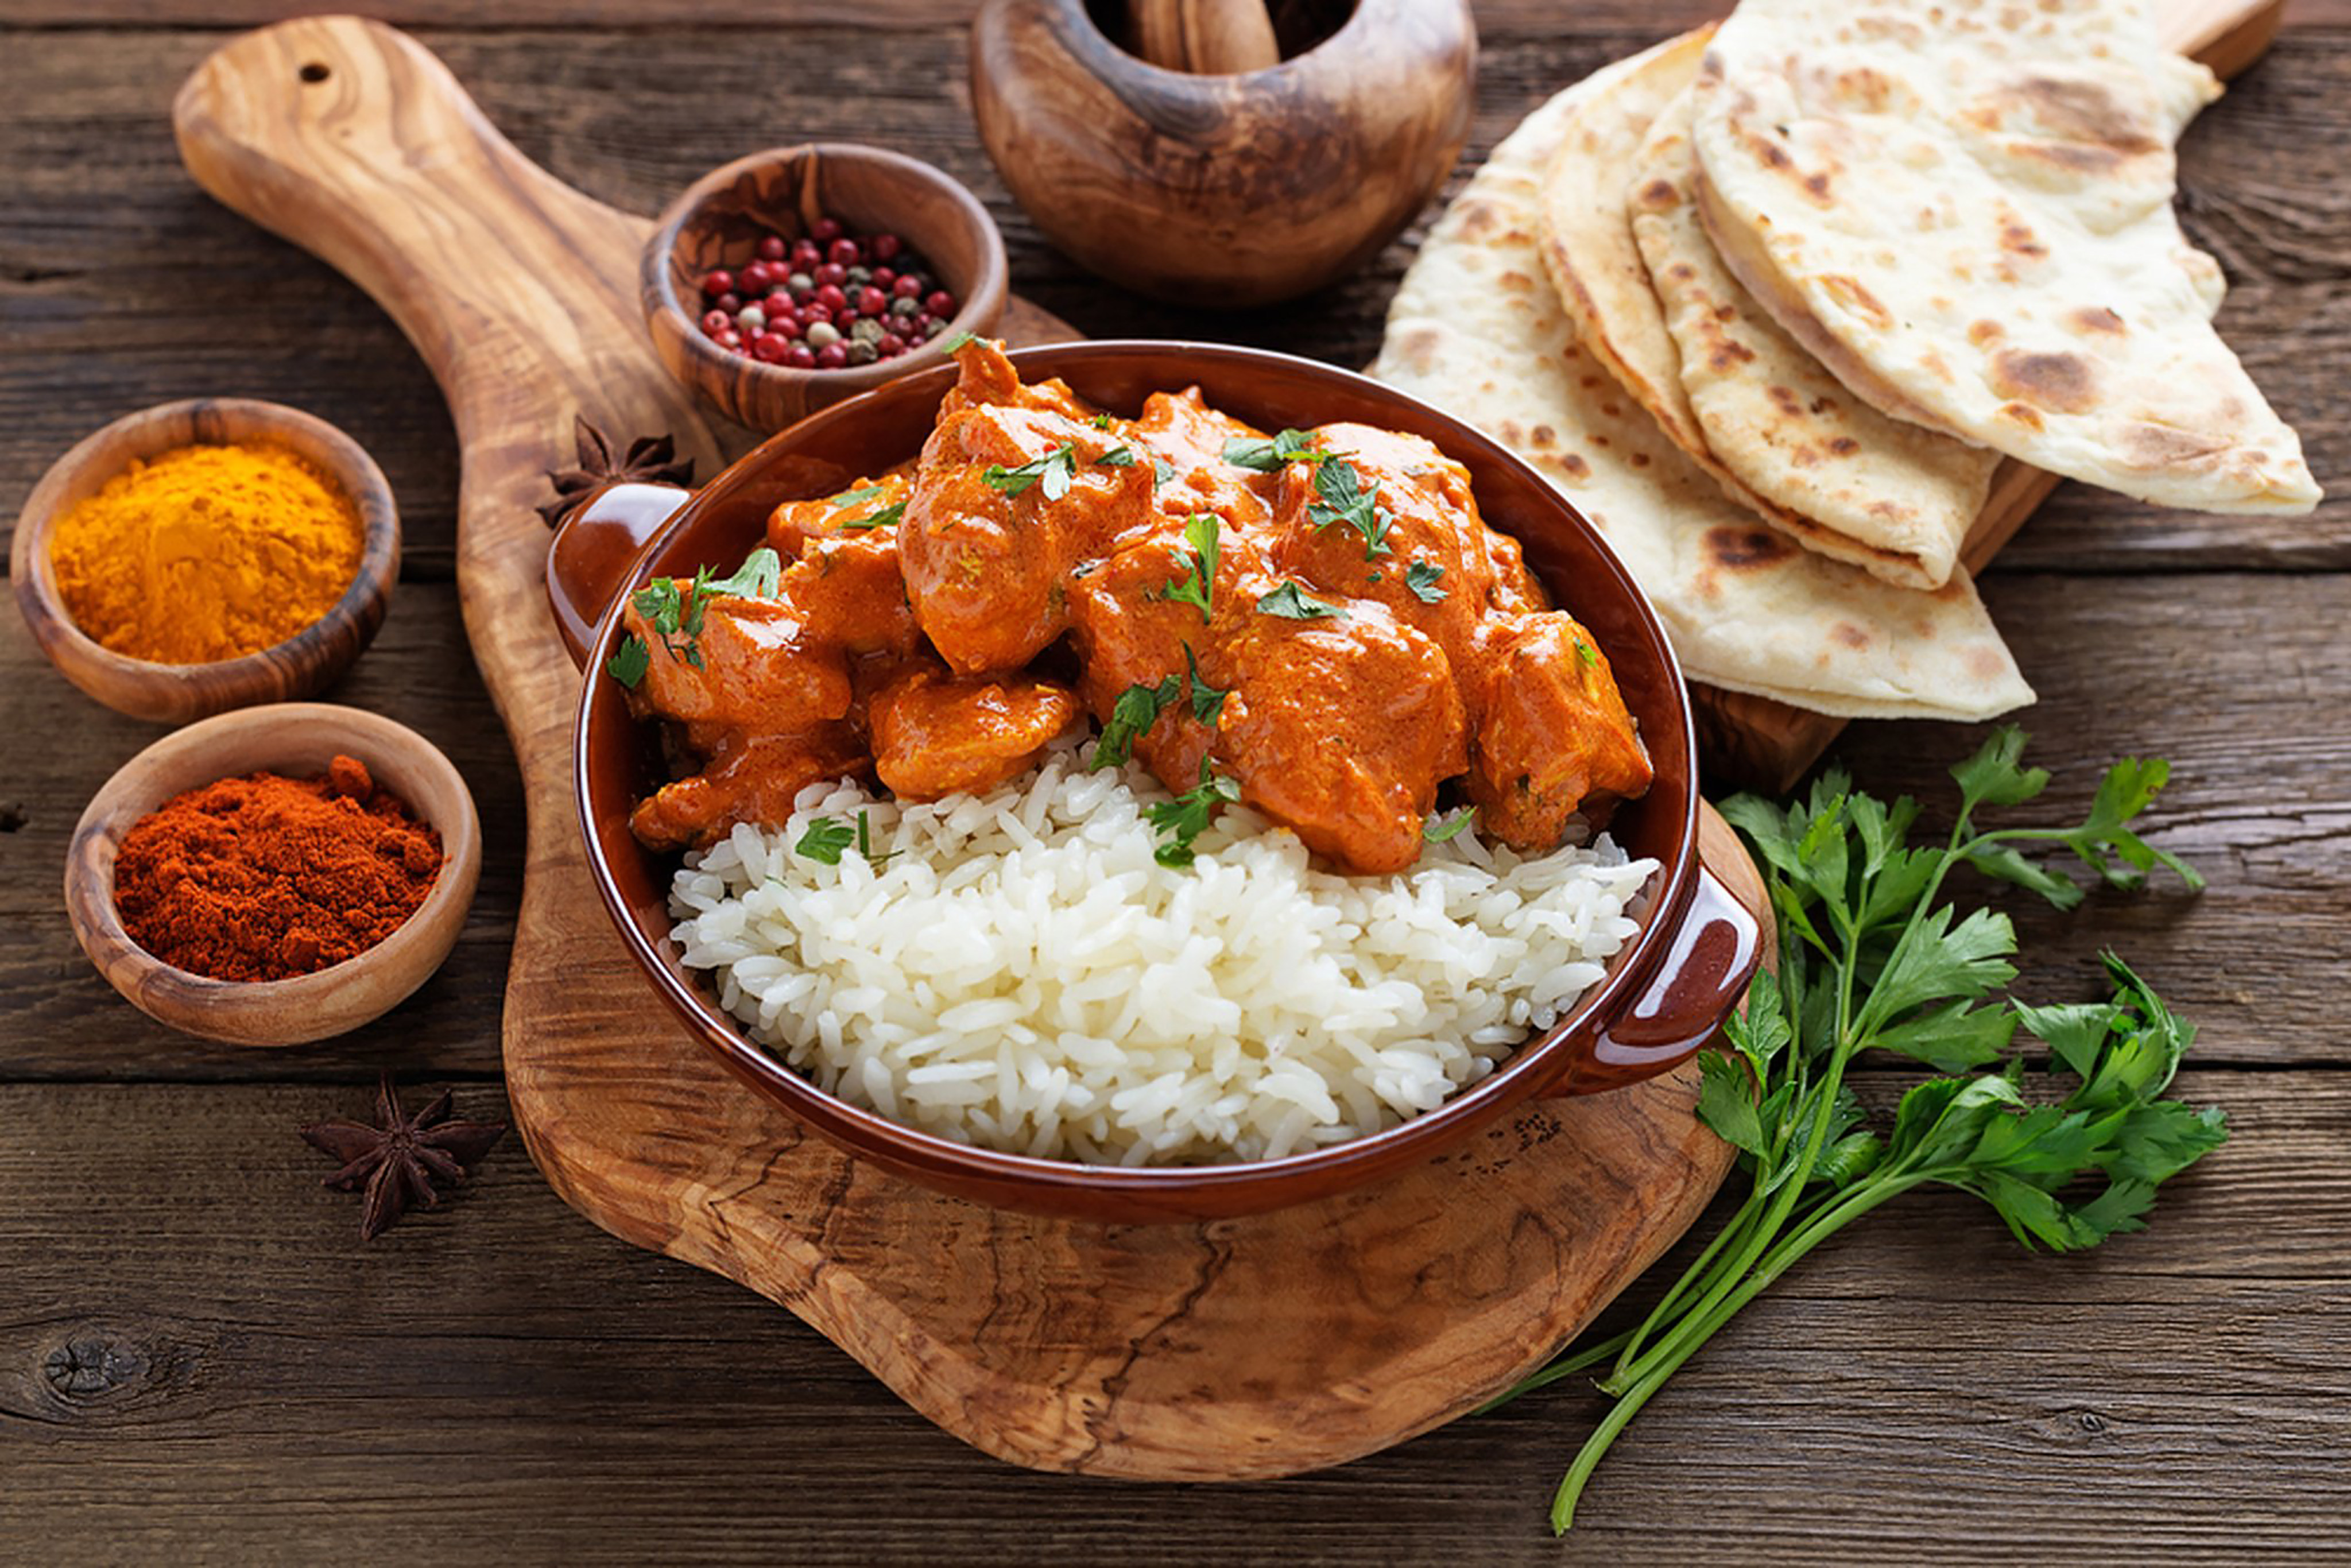 Chicken tikka masala is a dish Britain’s best Indian chefs respect, even if they won’t put it on their menus. Photo: Getty Images